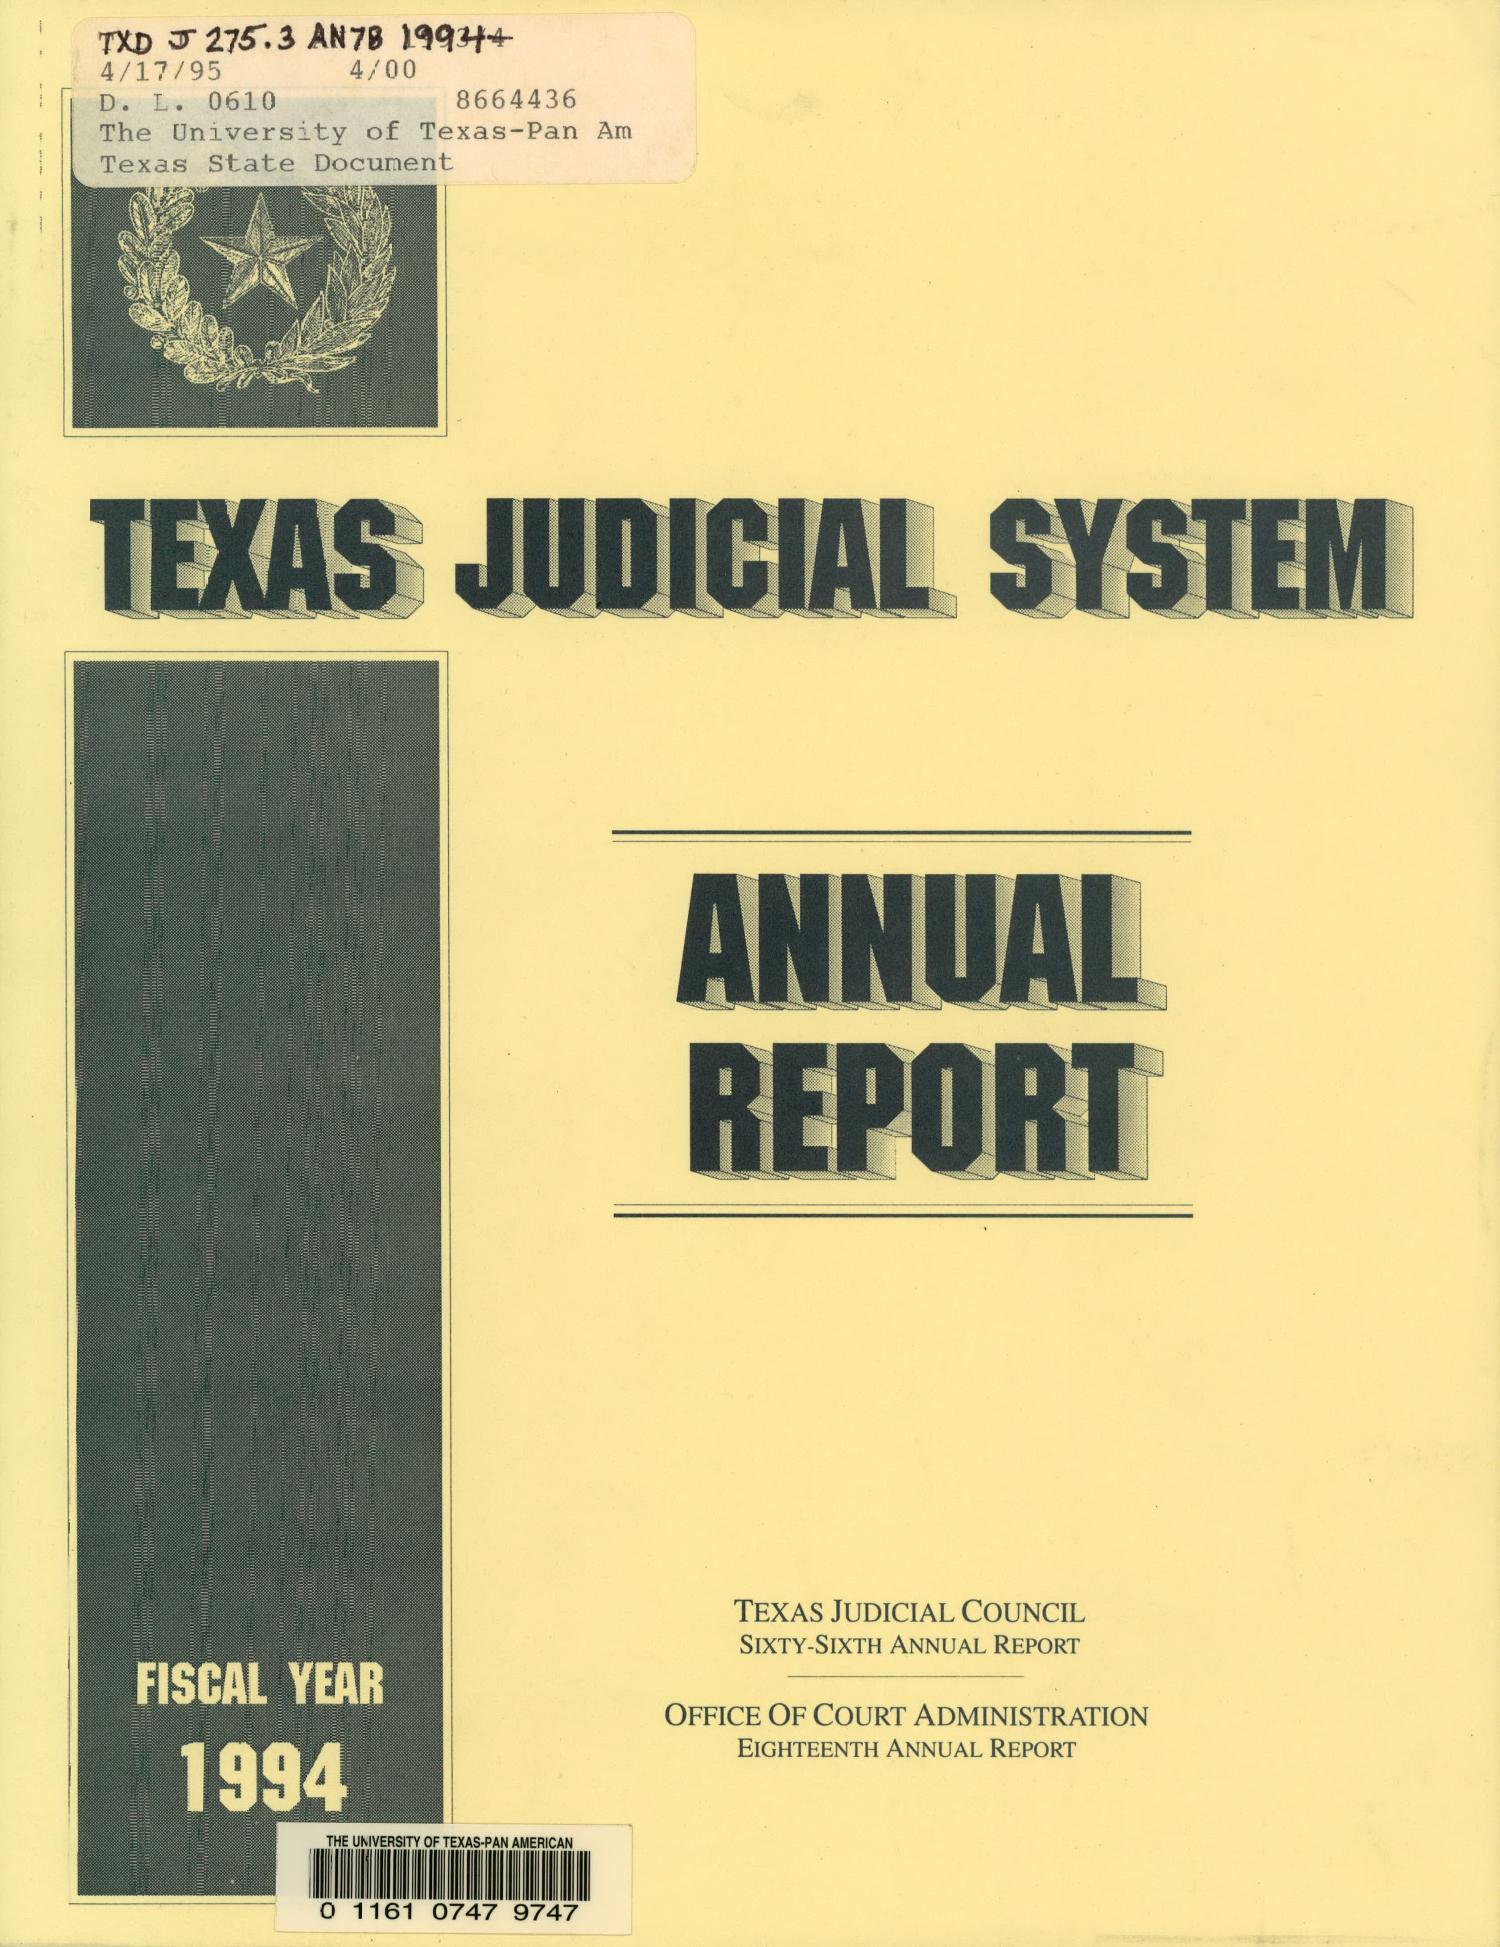 Texas Judicial System Annual Report 1994 The Portal to Texas History